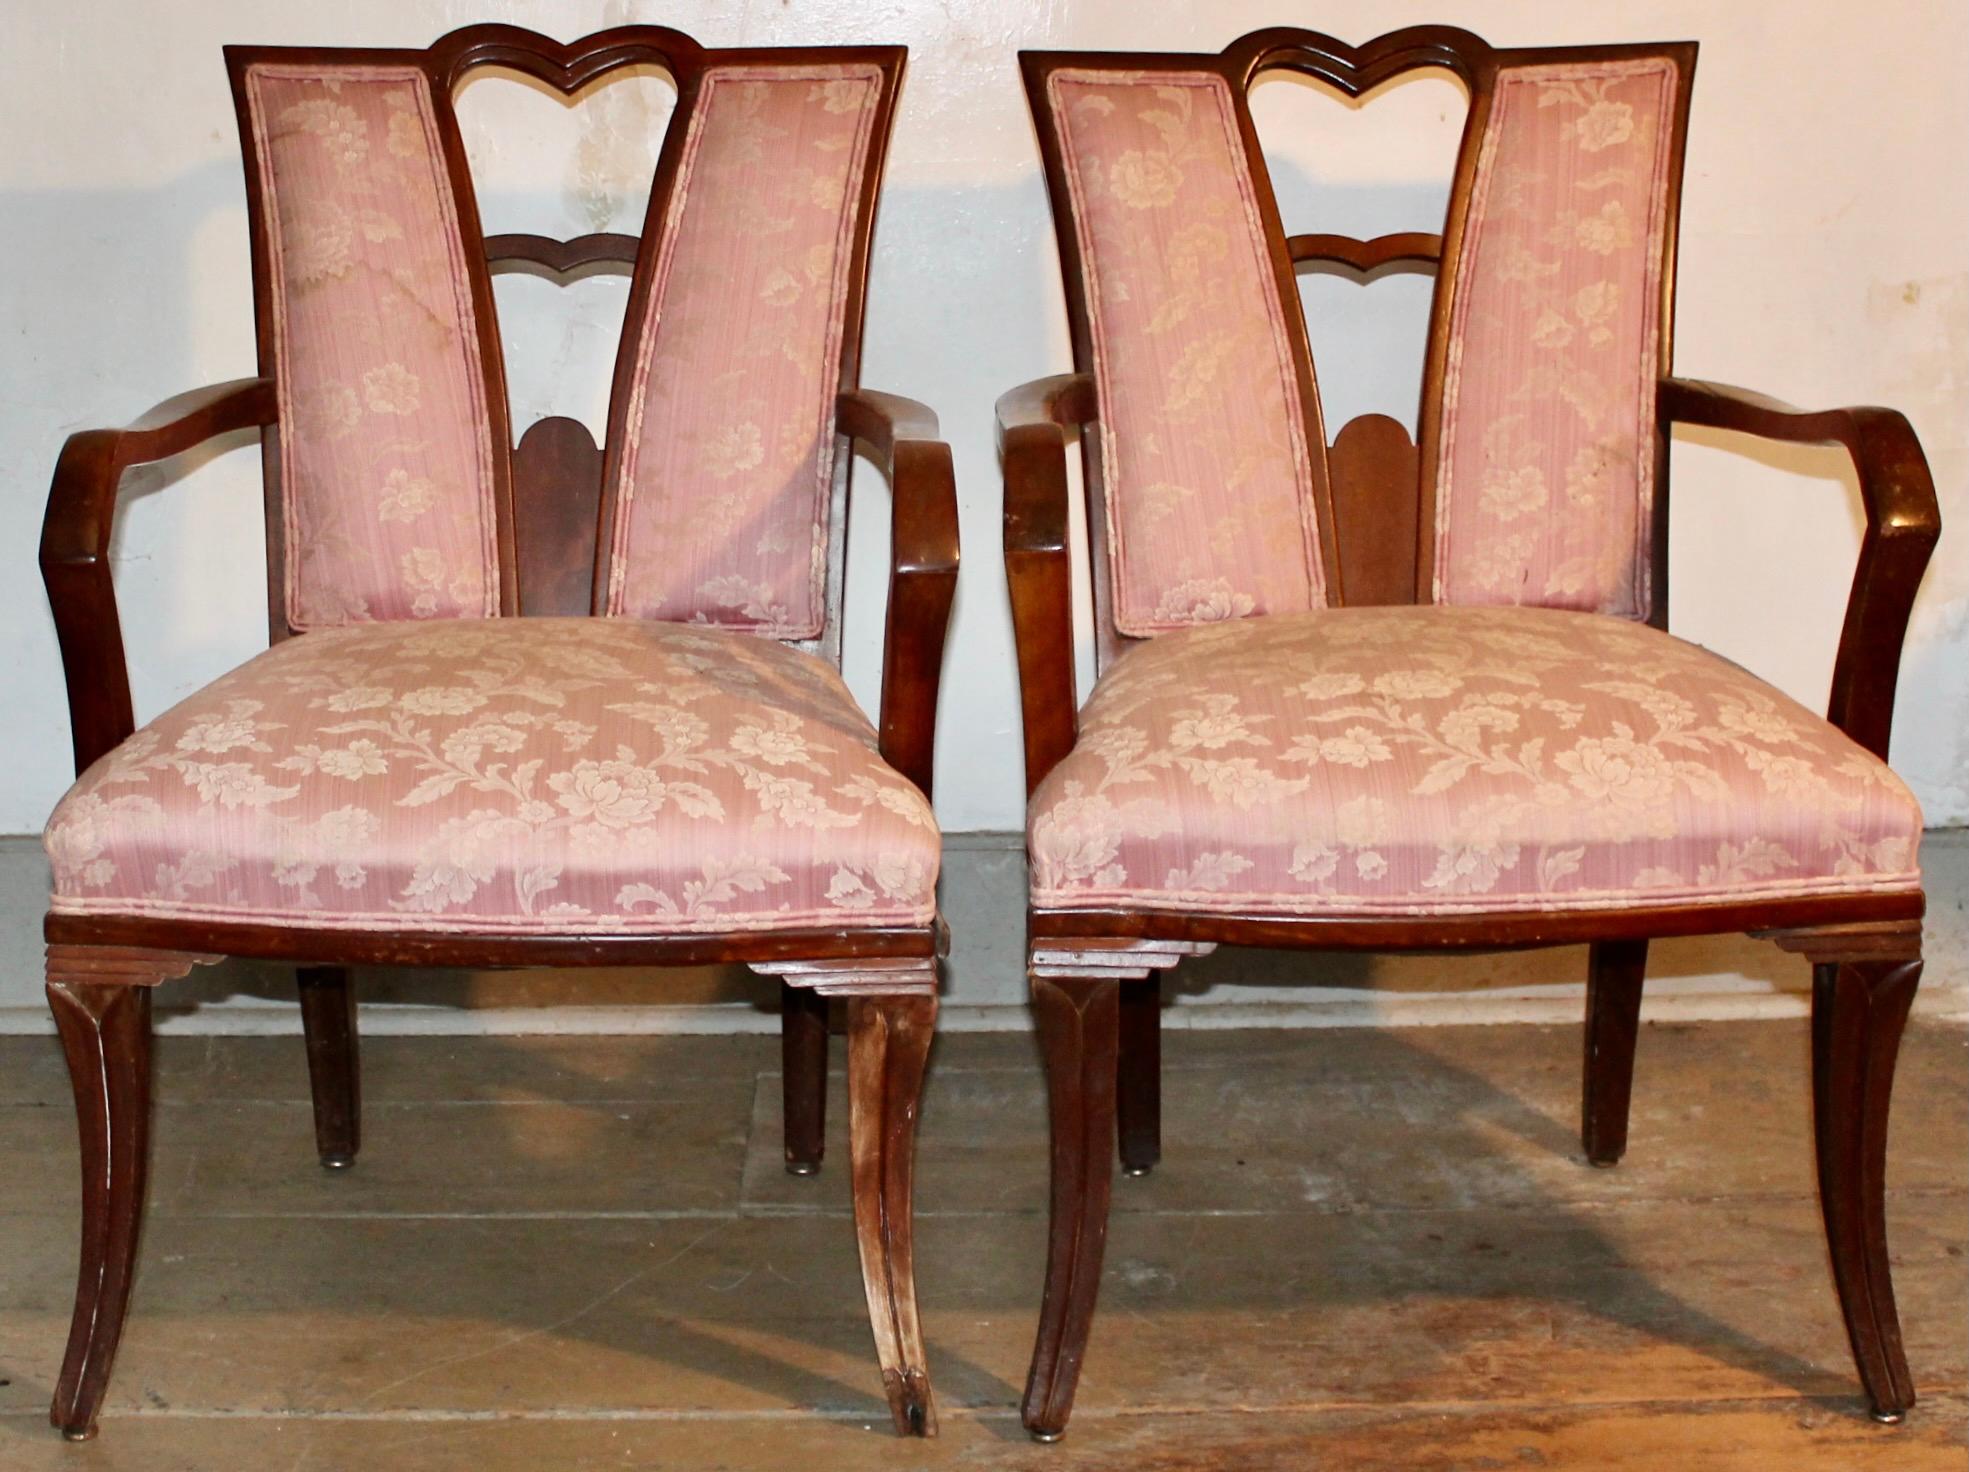 A pair of American Deco (Moderne) rosewood and mahogany armchairs in early (if not) original upholstery, designed by Eugene Schoen (1880-1957), and manufactured by Schieg Hungate and Kotzian, inc, 1924-1933. A settee from the set is illustrated in: